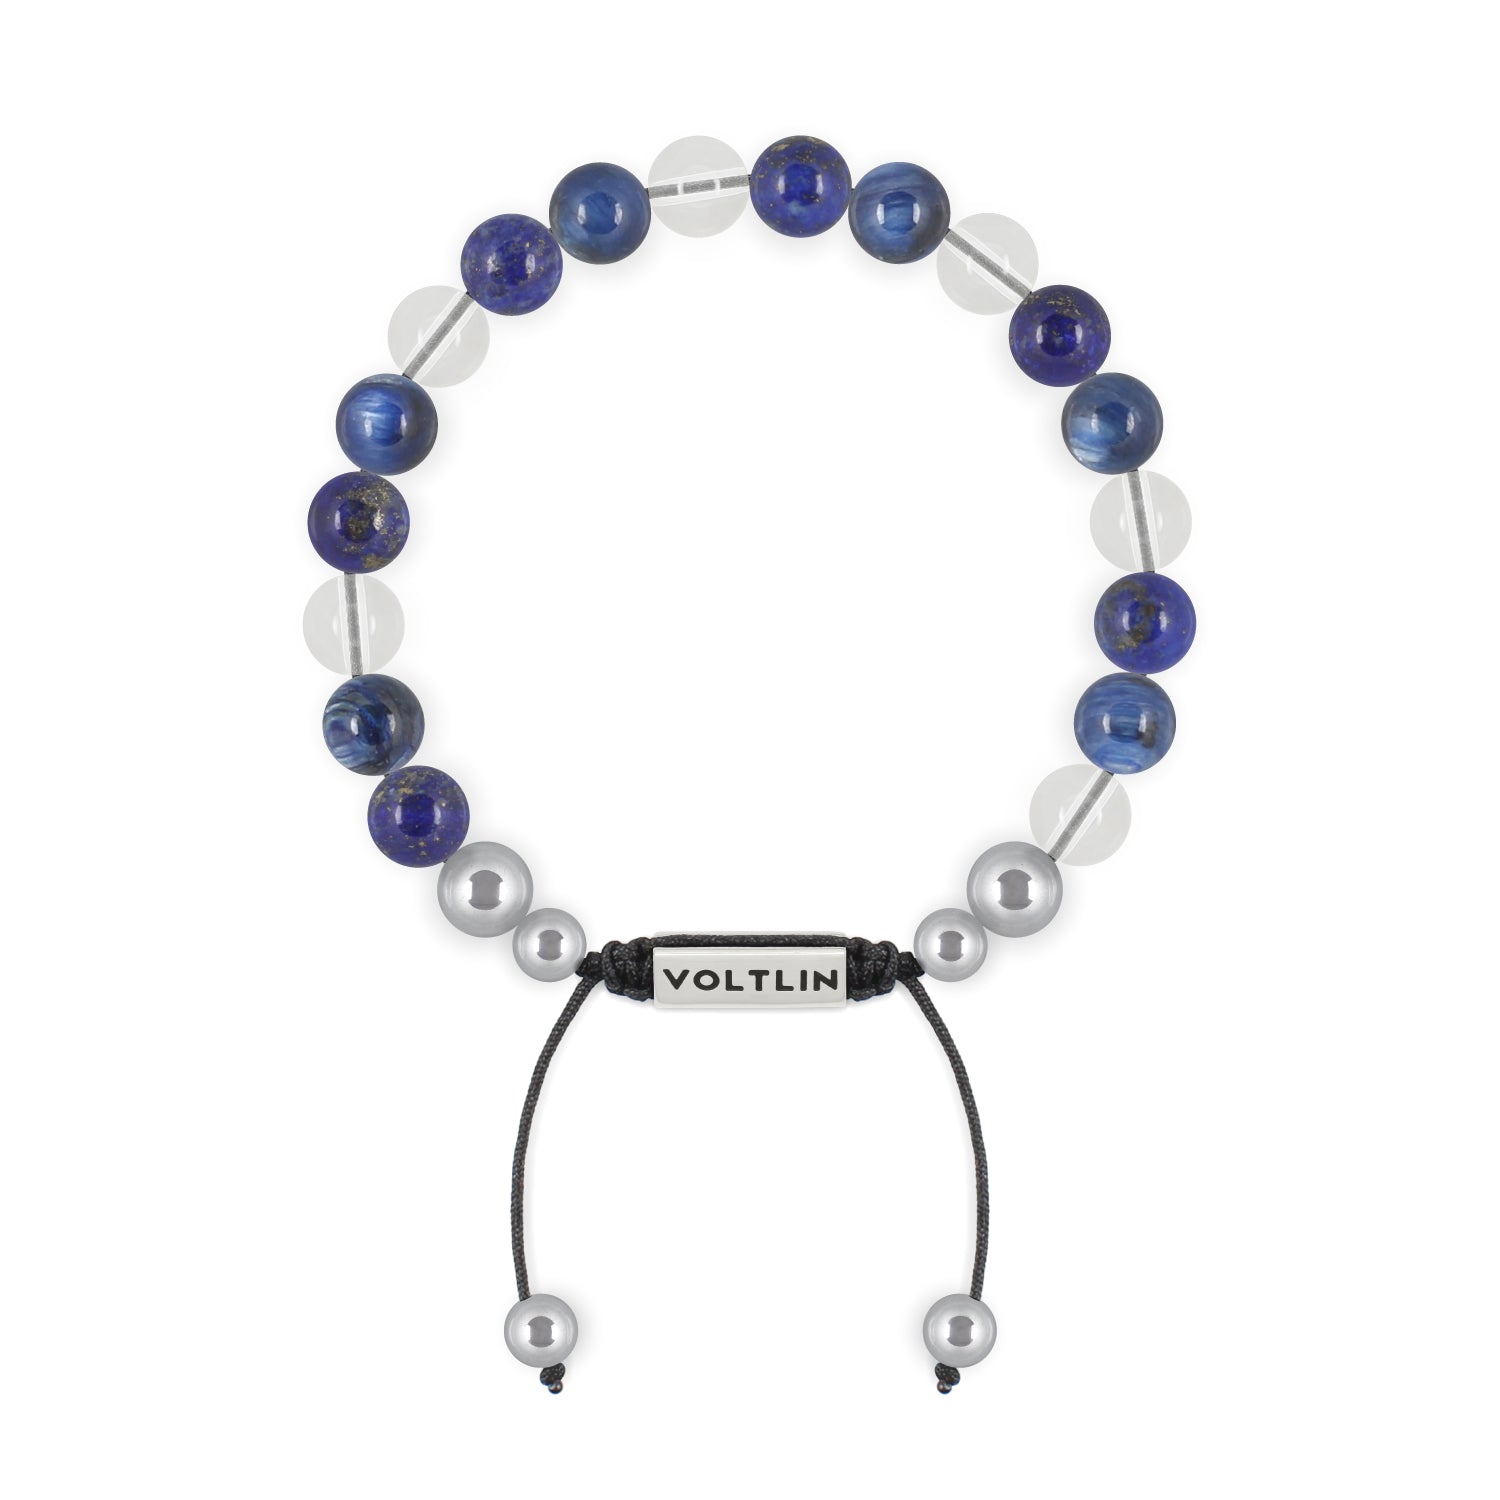 Front view of an 8mm Taurus Zodiac beaded shamballa bracelet featuring Lapis Lazuli, Kyanite, & Quartz crystal and silver stainless steel logo bead made by Voltlin